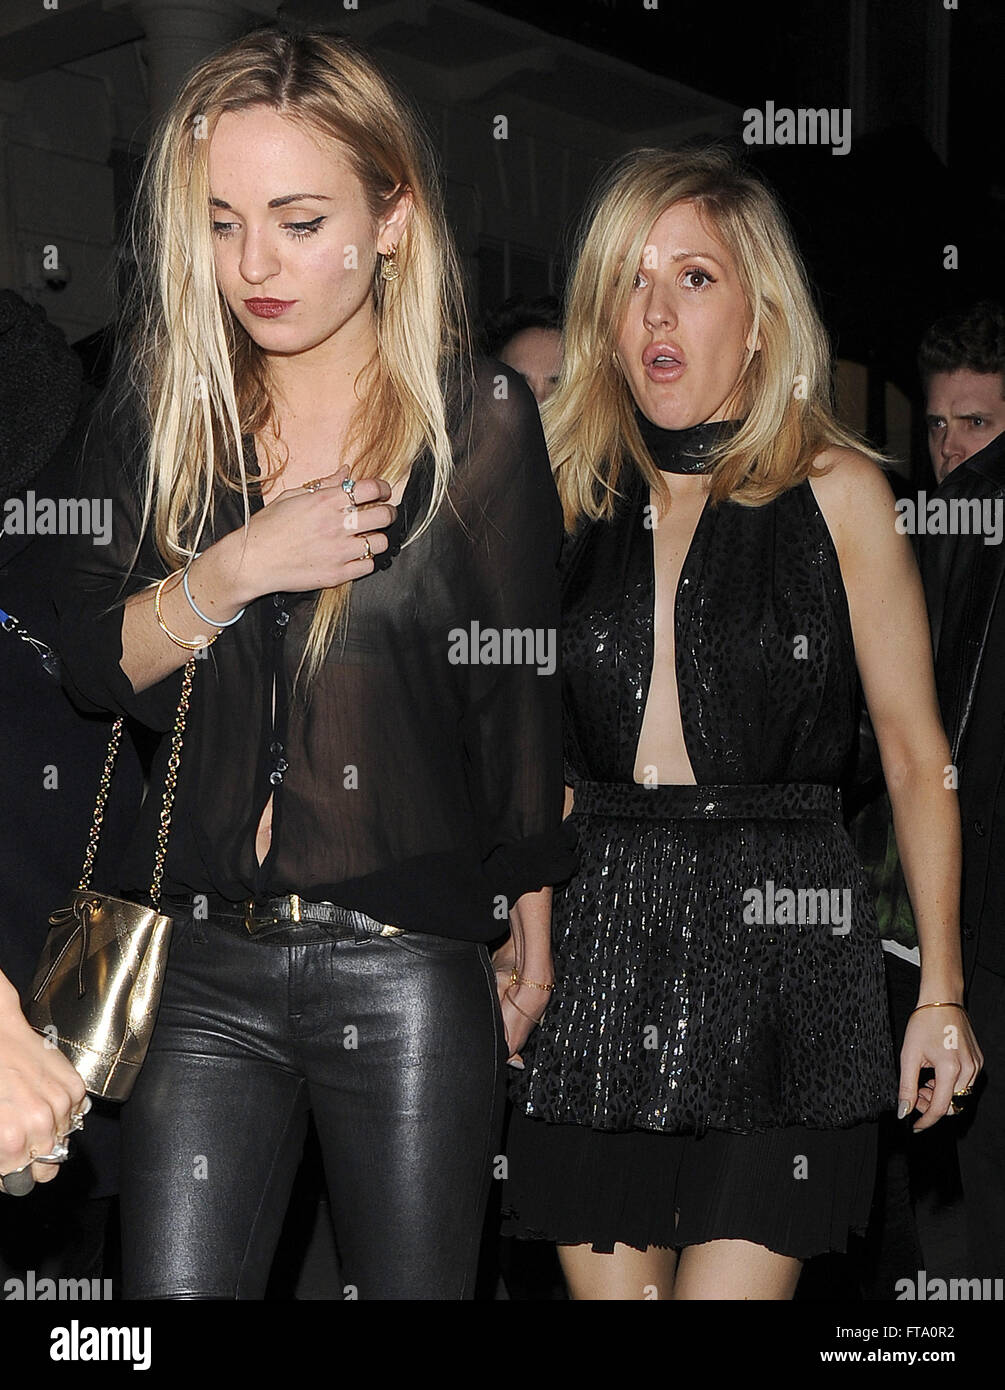 Celebrities attend a party at Tape nightclub in Mayfair, following the ...